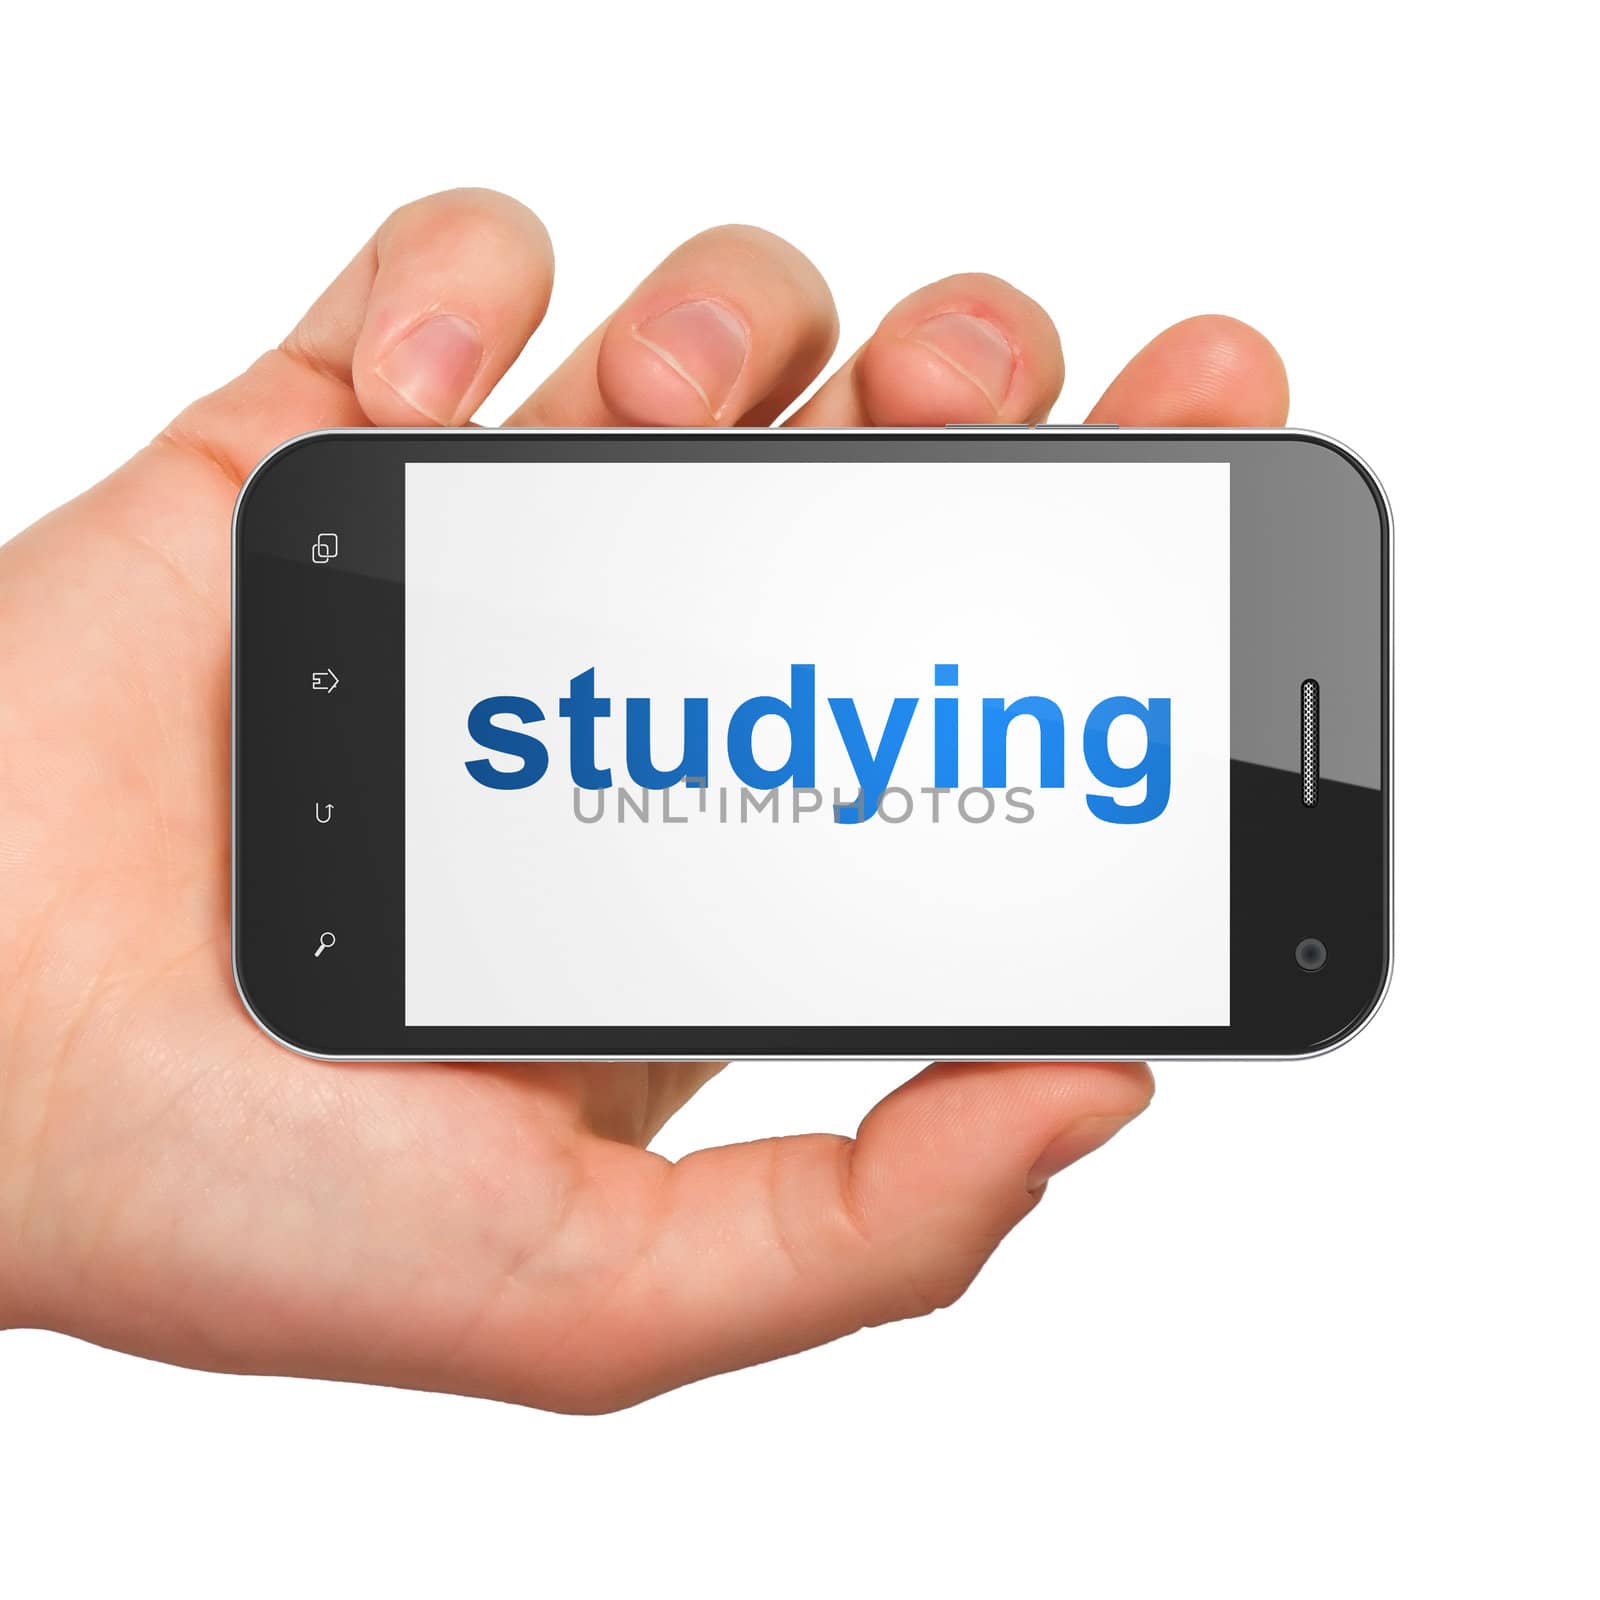 Hand holding smartphone with word studying on display. Generic mobile smart phone in hand on white background.